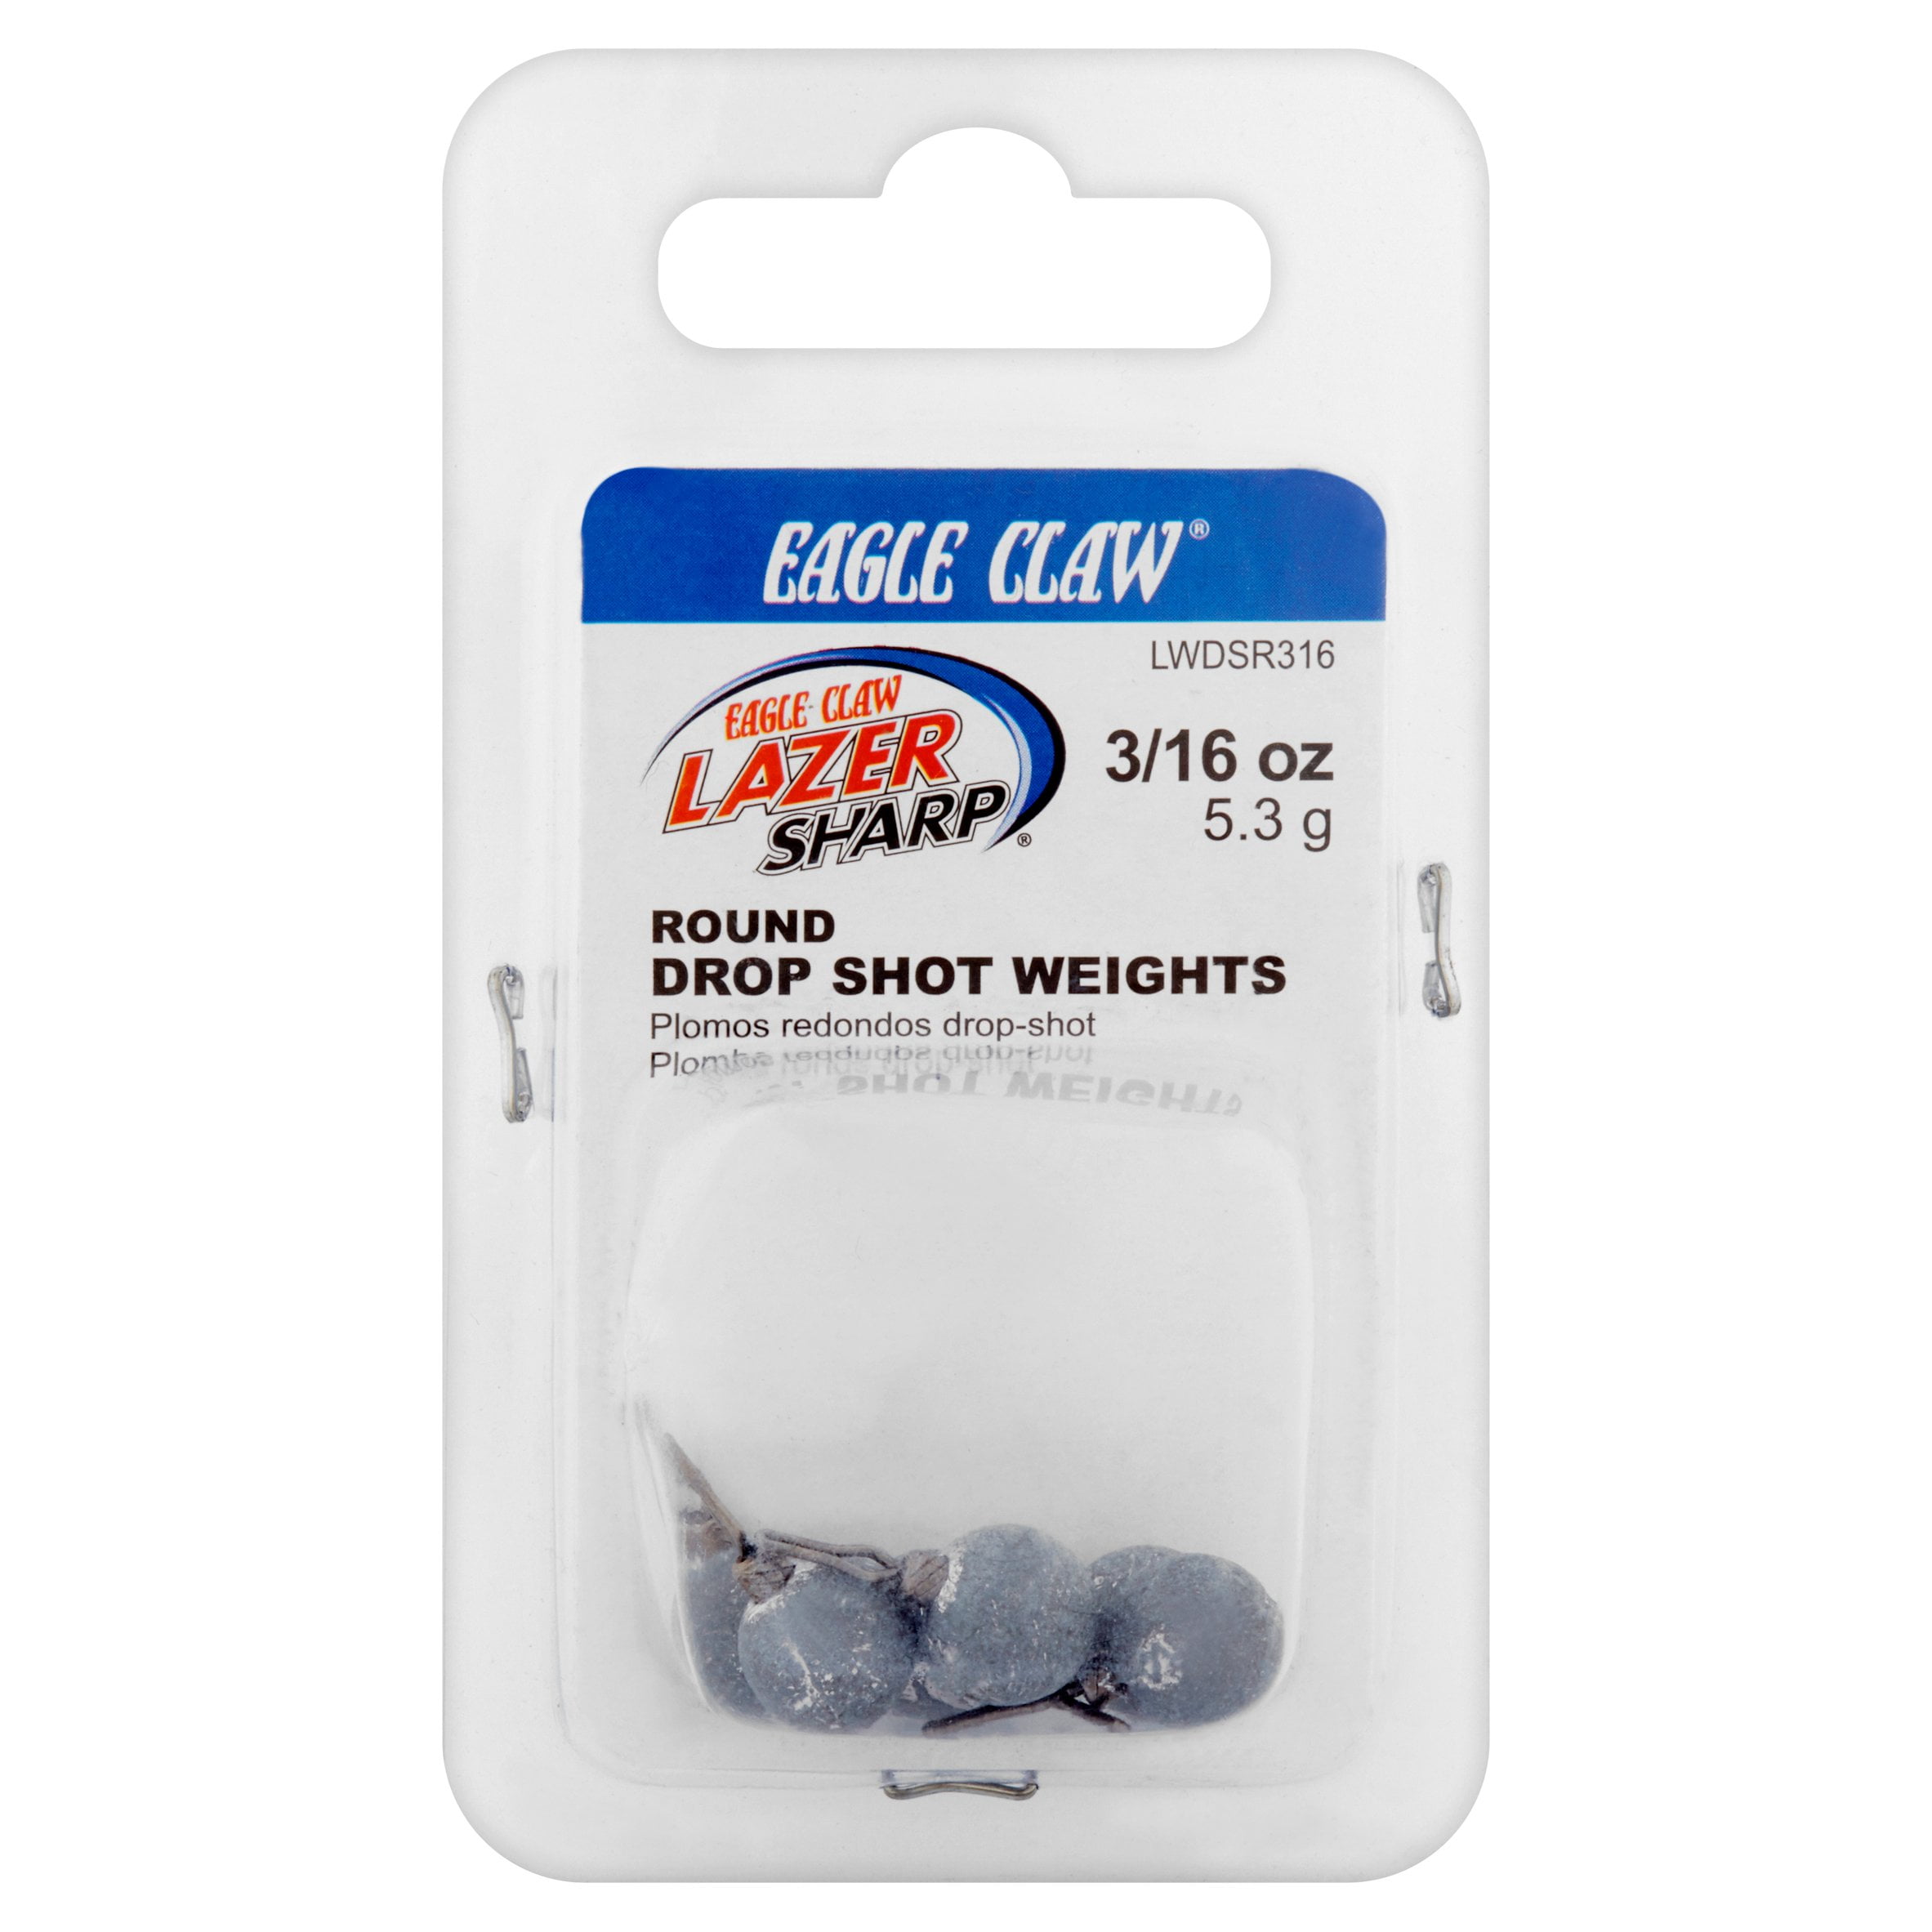 Bullet Weights® WPY2-24 Lead Pyramid Sinker Size 2 Oz. Fishing Weights 